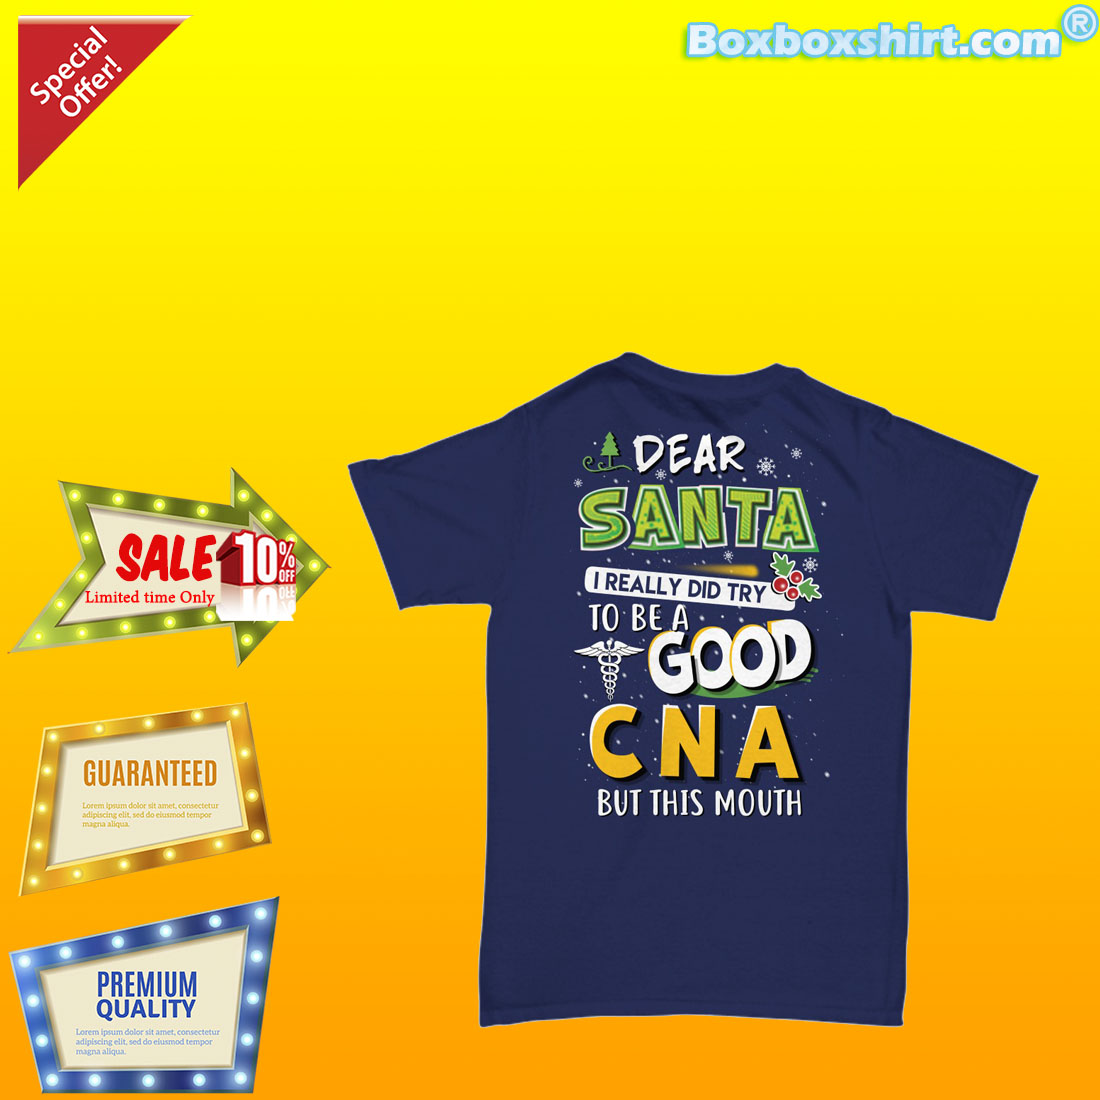 Dear santa I really did try to be a good CNA but this mouth shirt